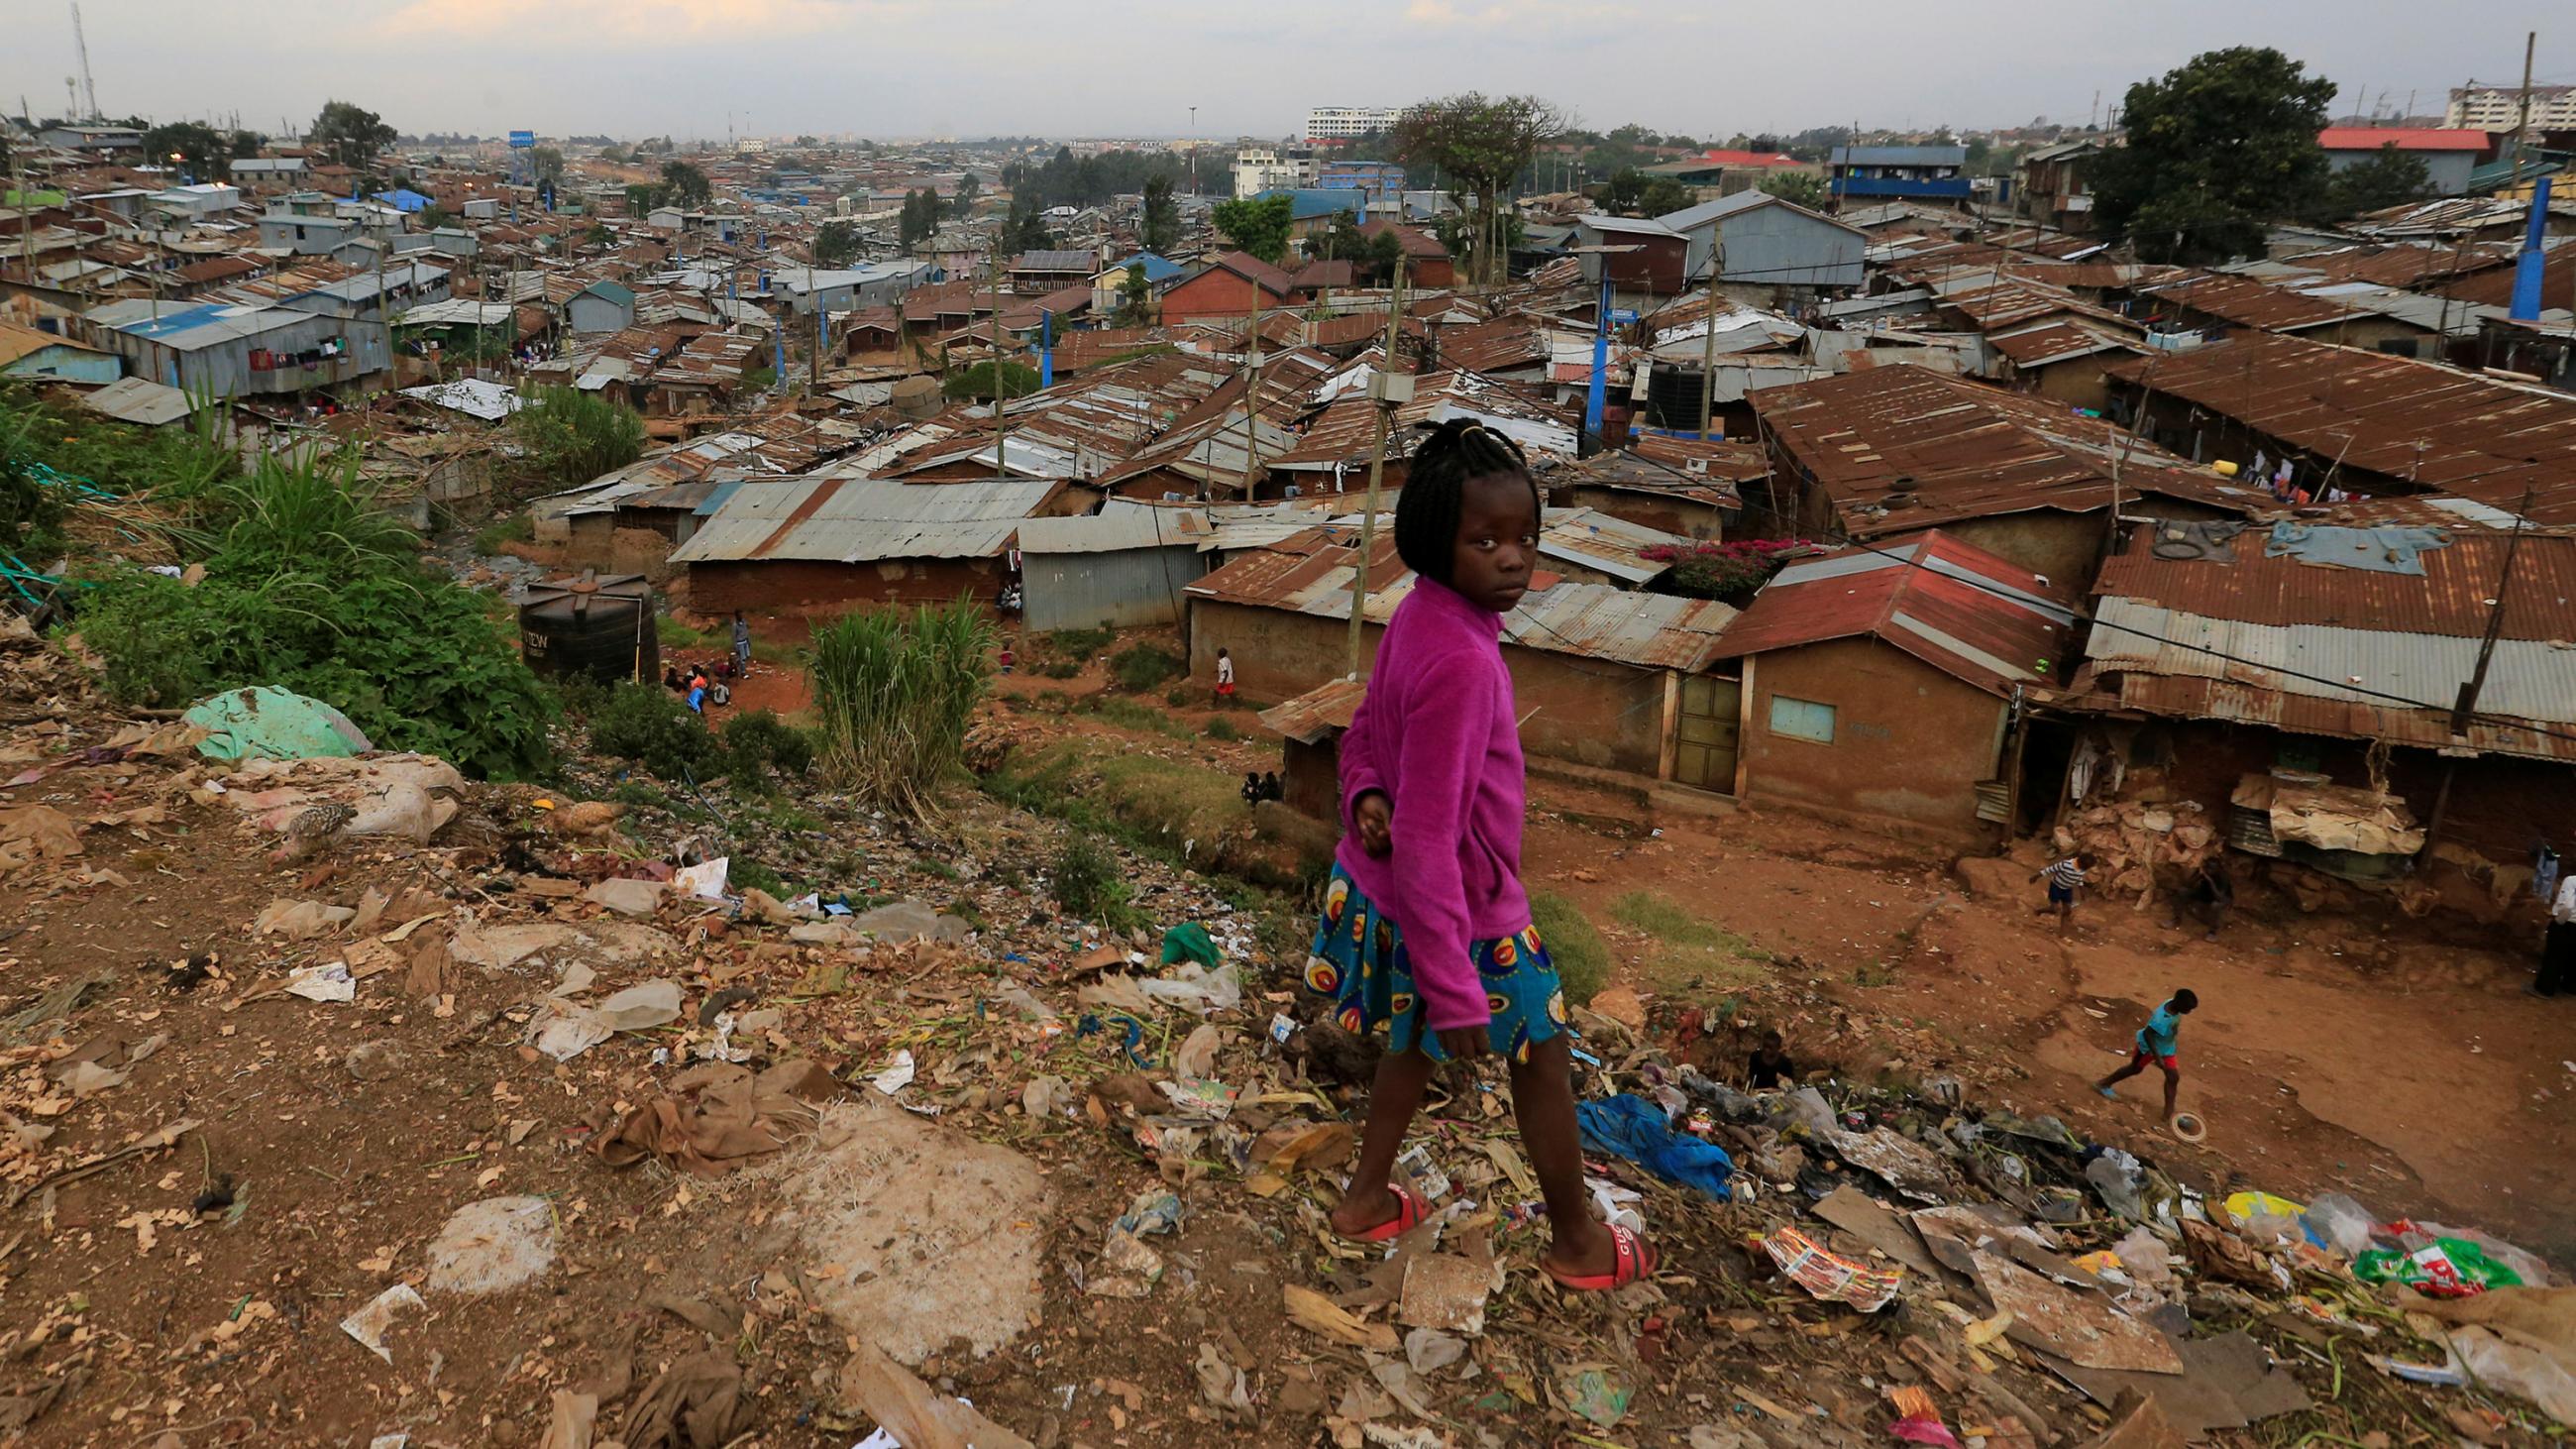 The photo shows a girl standing atop a hill littered with trash overlooking a residential area of poor houses with rusty metal roofing. 